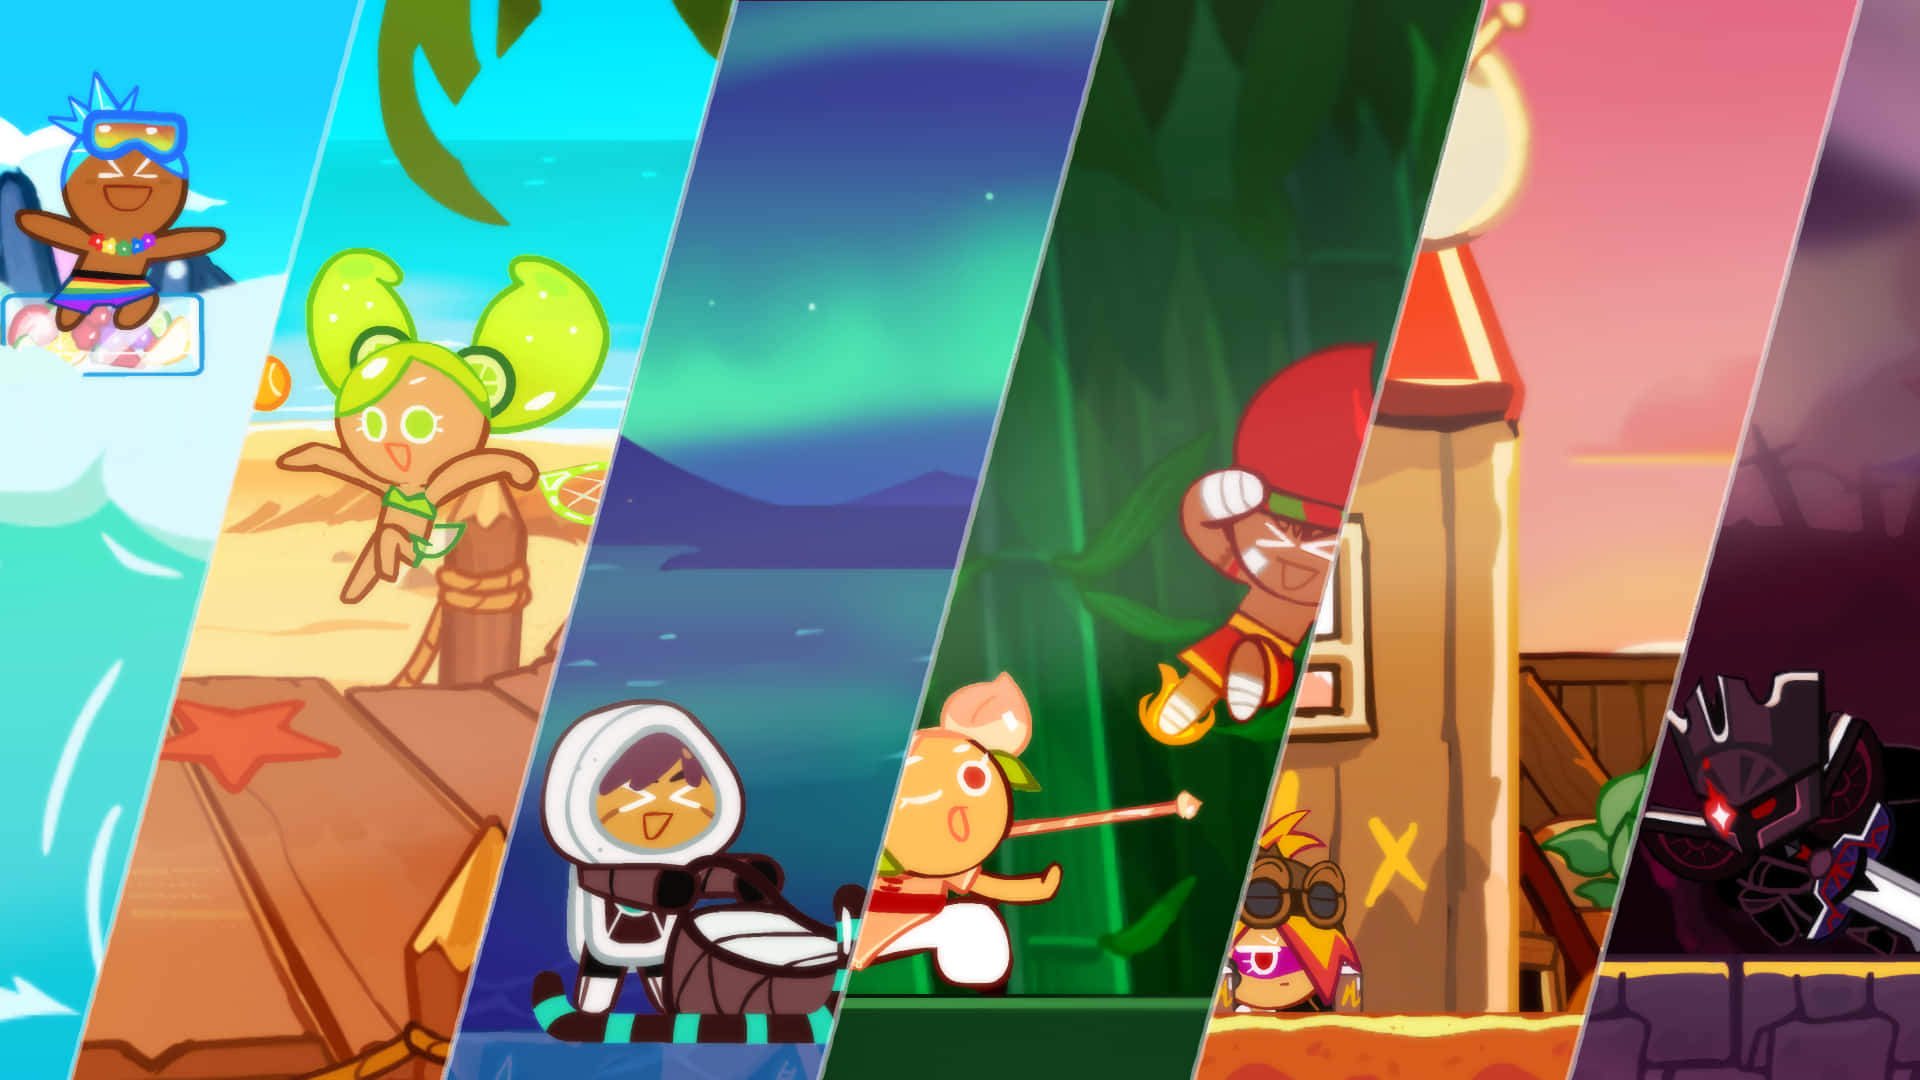 Welcome to Cookie Run Kingdom, the world of adventure!